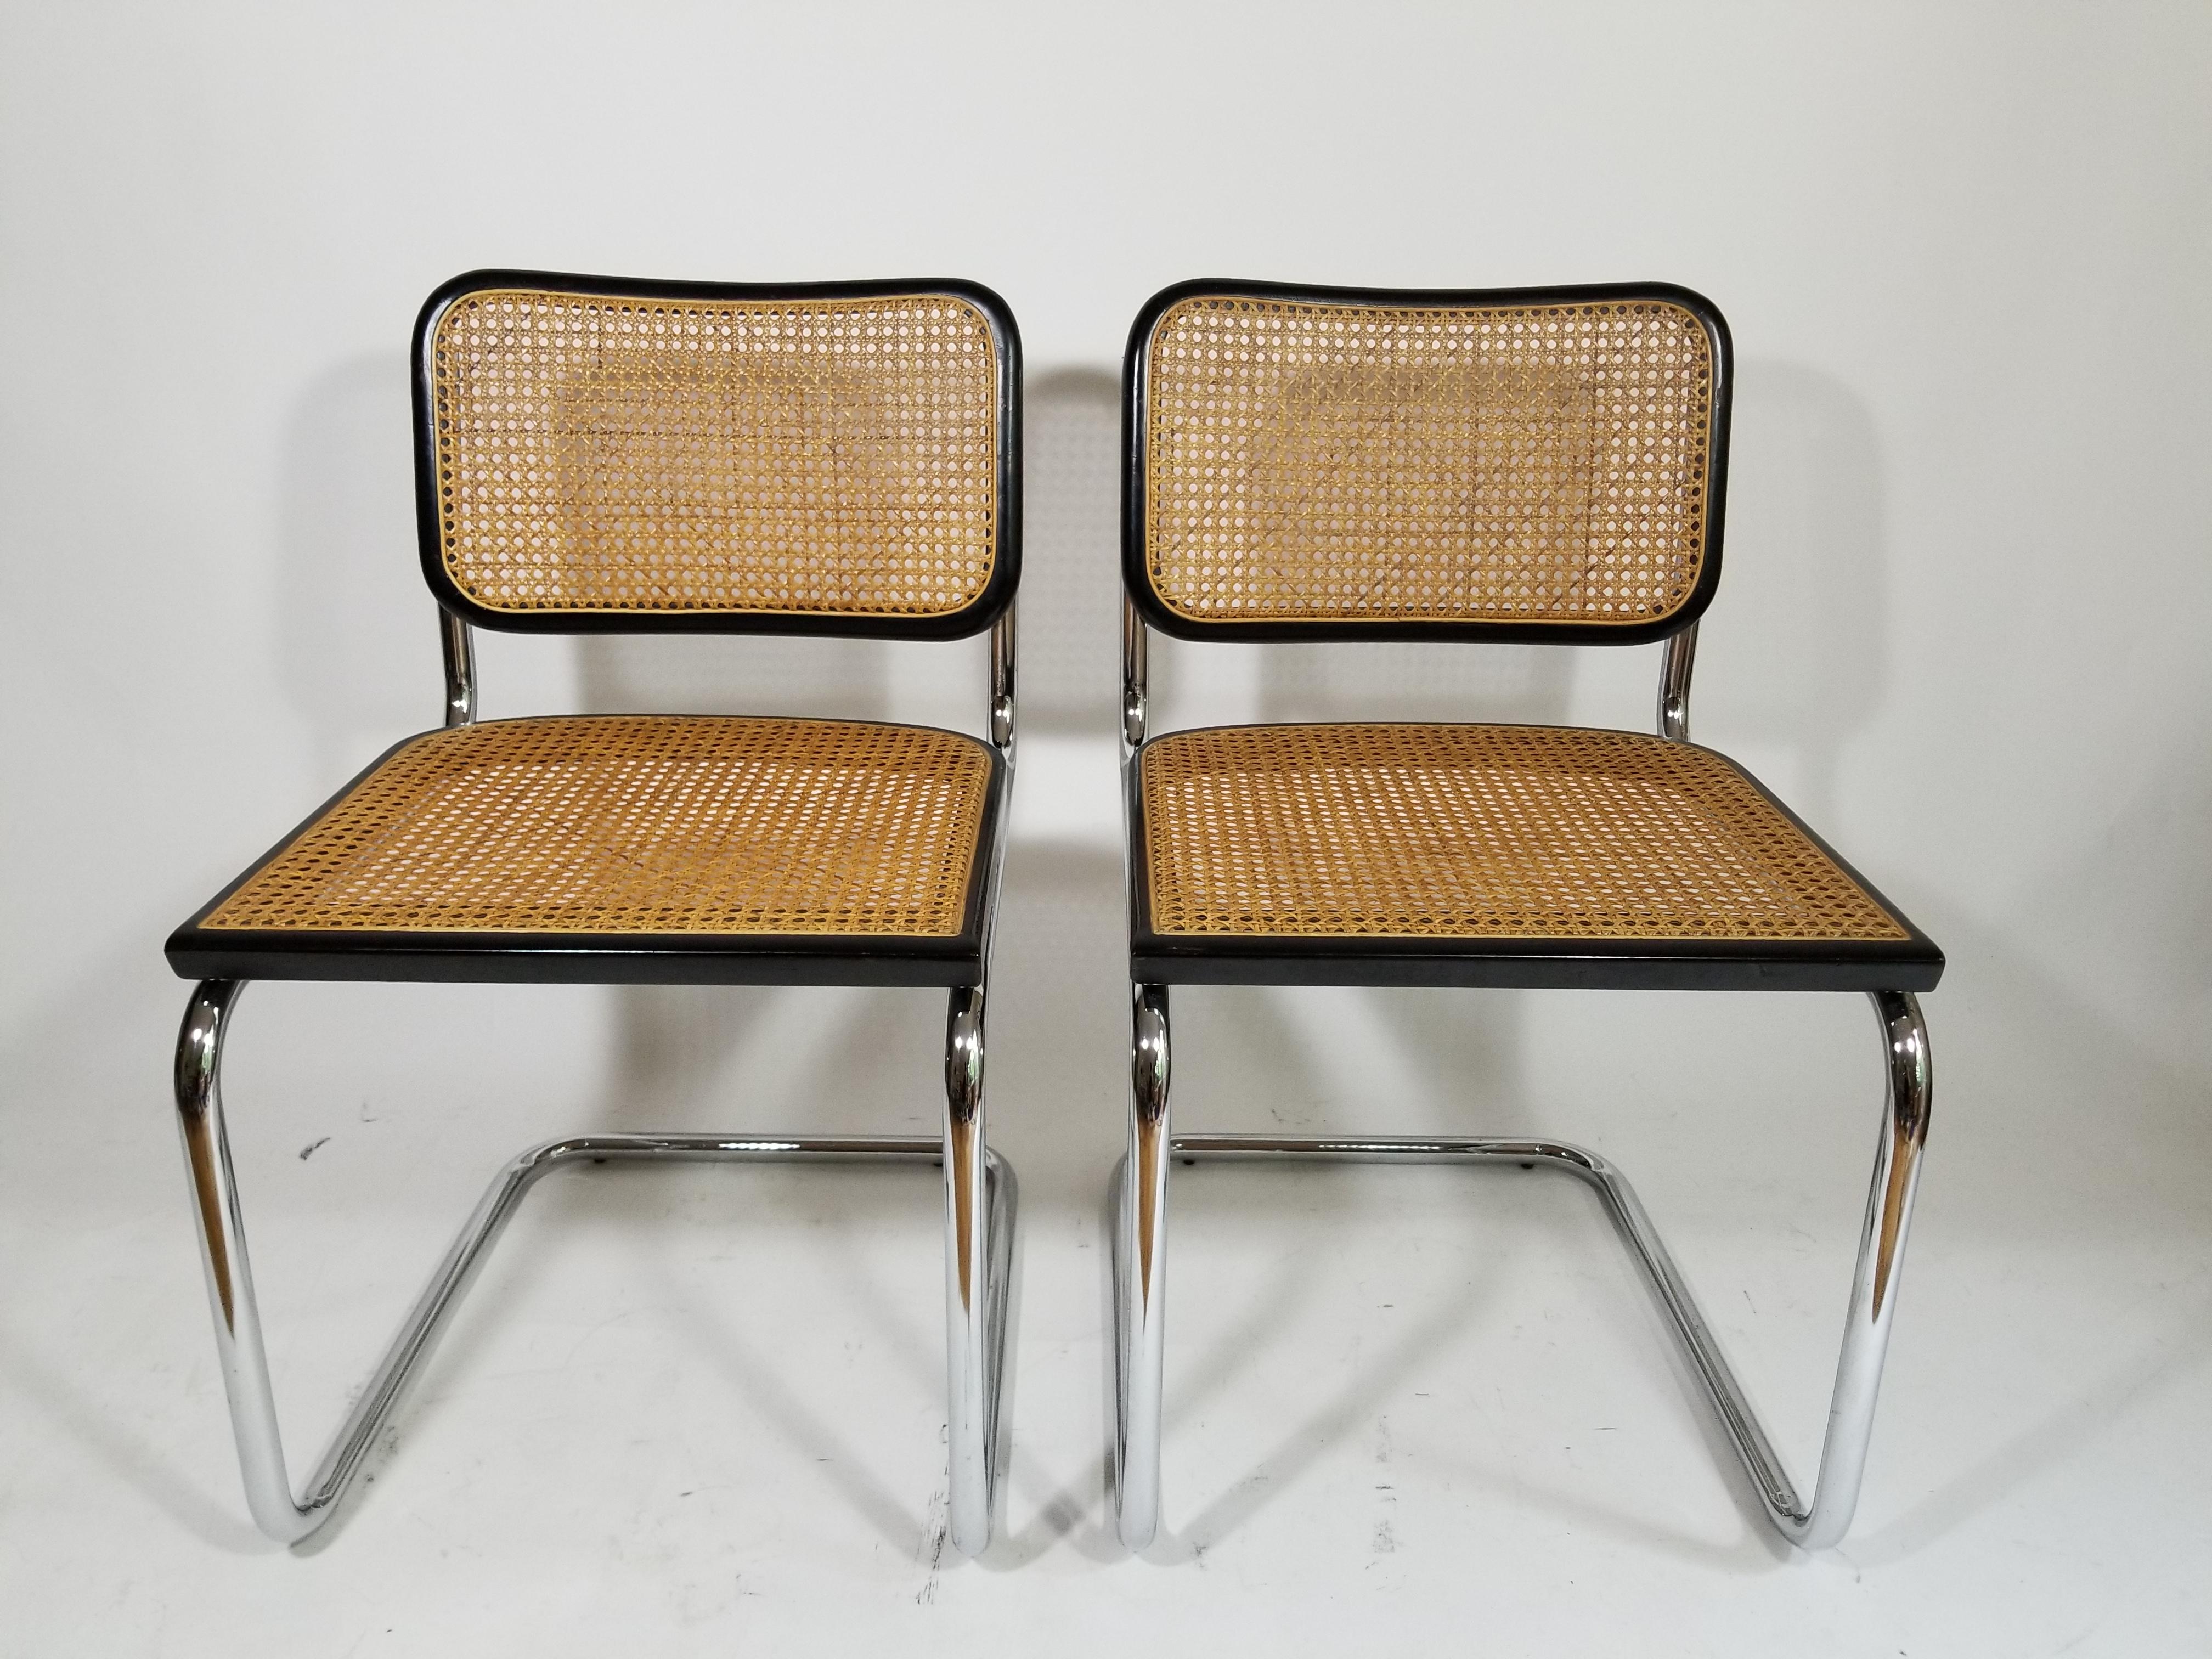 Midcentury pair of Marcel Breuer Cesca side chairs. Black finish. Cane back and seat. Caning is intact and is a gorgeous carmel color. Classic tubular chrome frame. Made in Italy.
Complimentary free delivery in NYC and surrounding areas can be